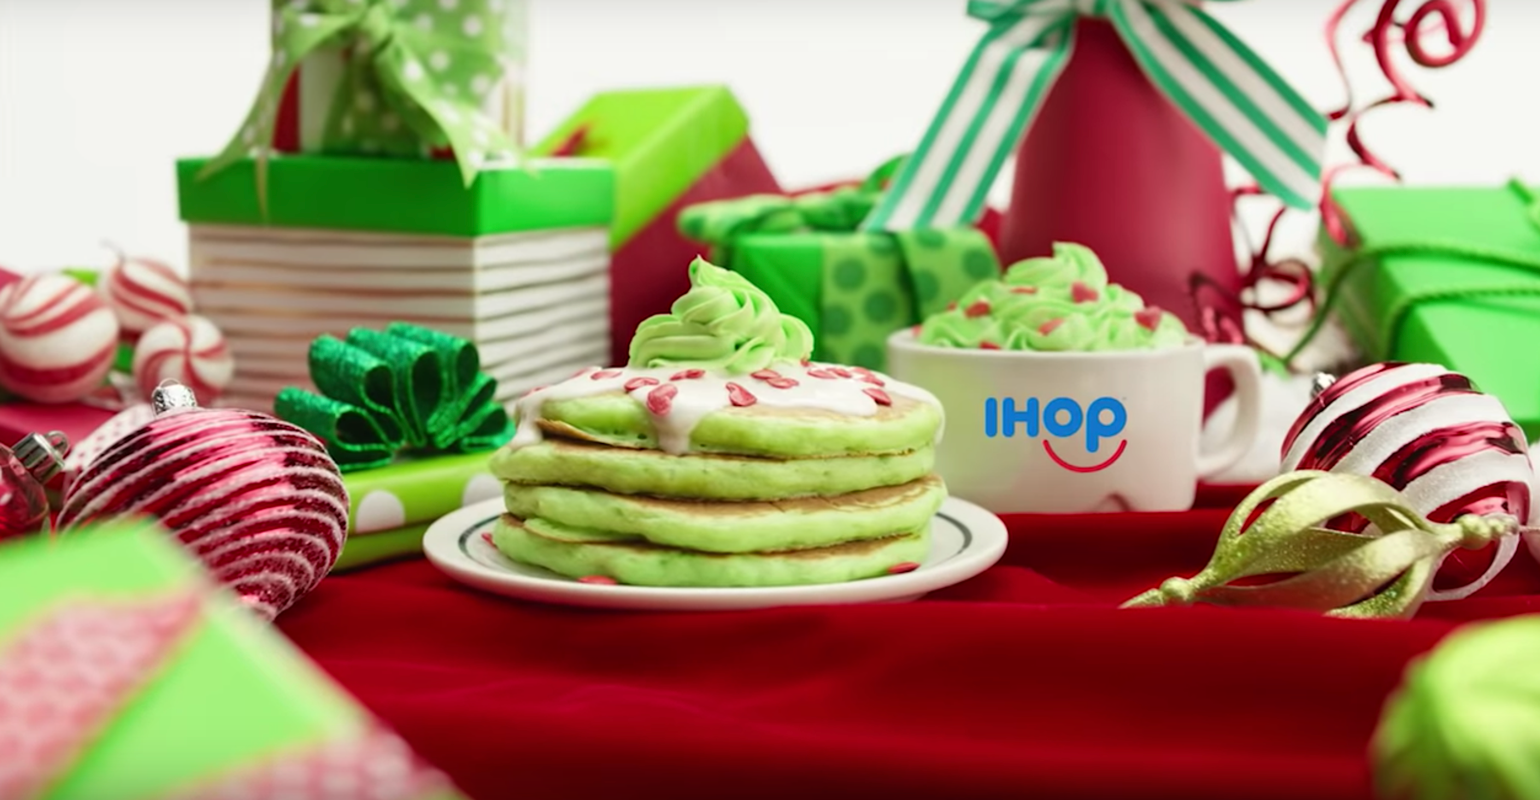 IHOP Is Selling An Elf On The Shelf Menu With Pancakes And Hot Chocolate